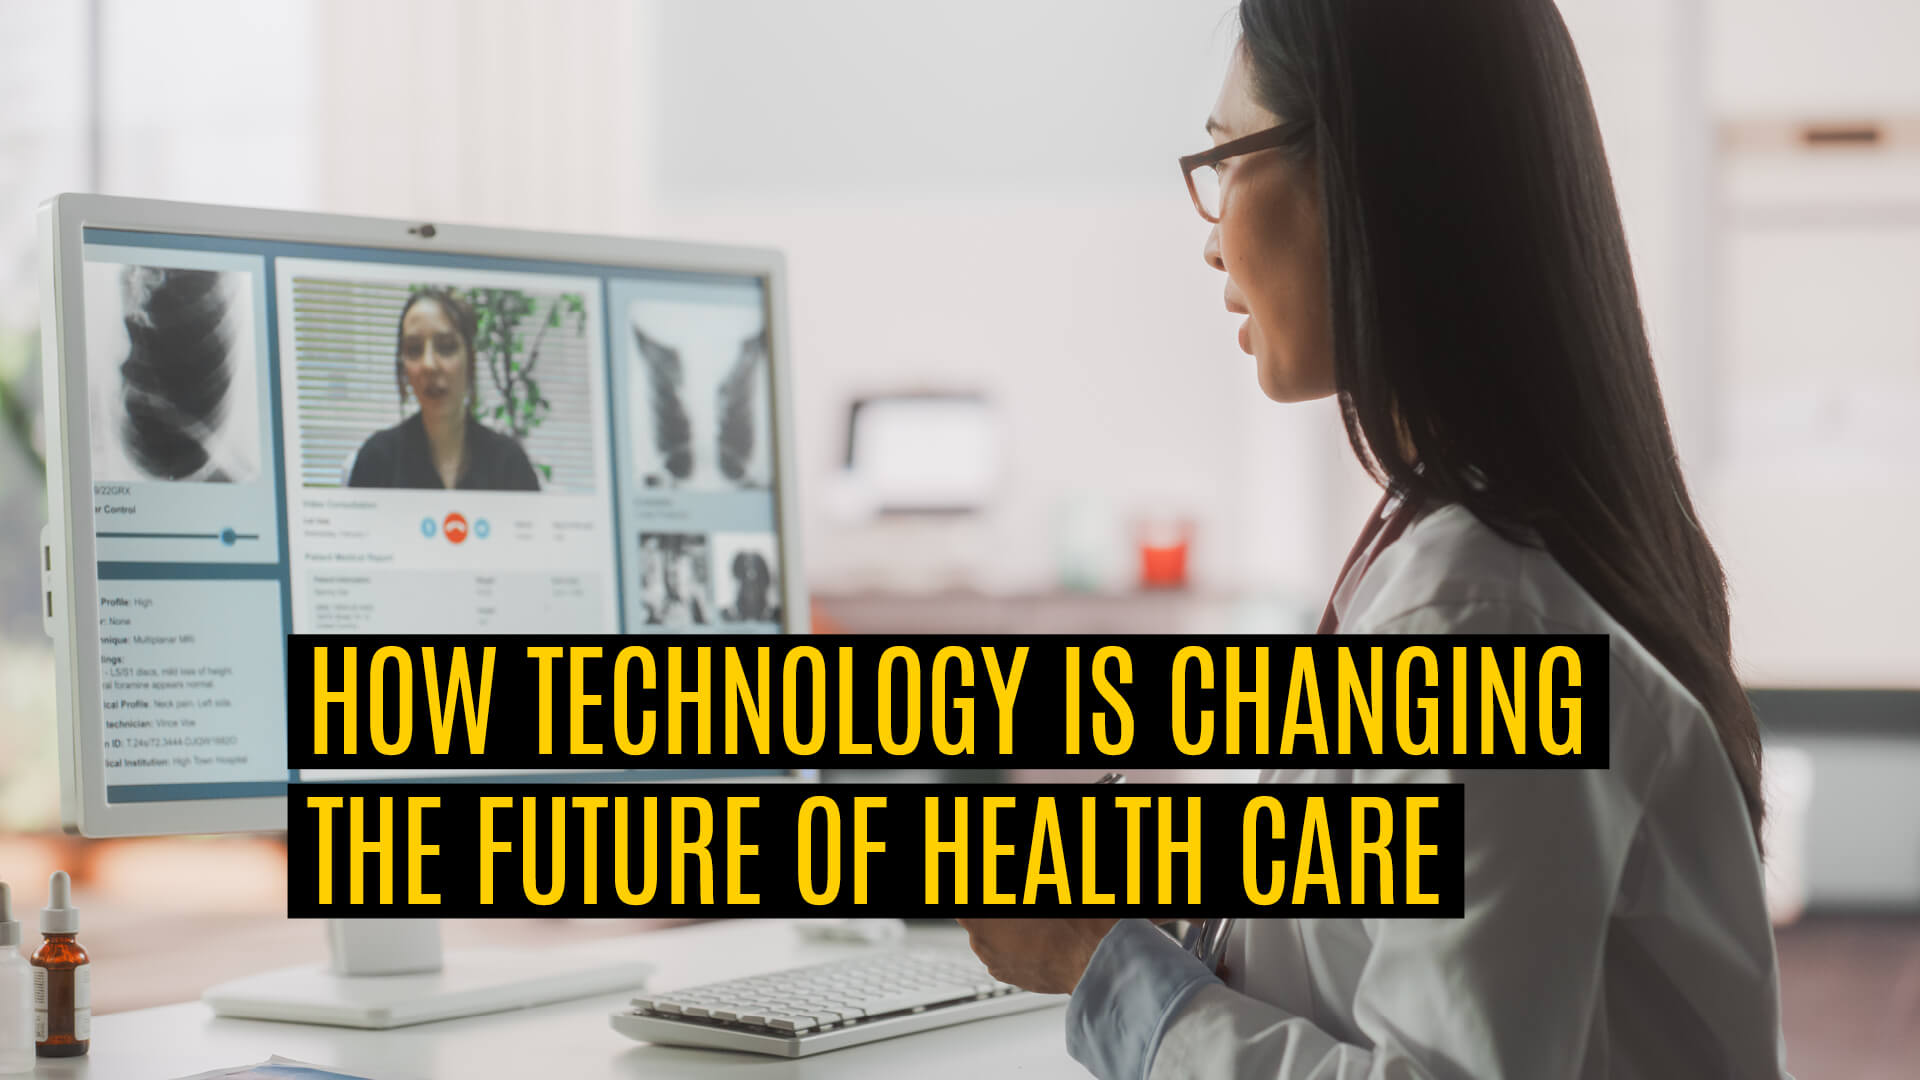 Iowa City Mini Medical School: How Technology is Changing the Future of Health Care promotional image